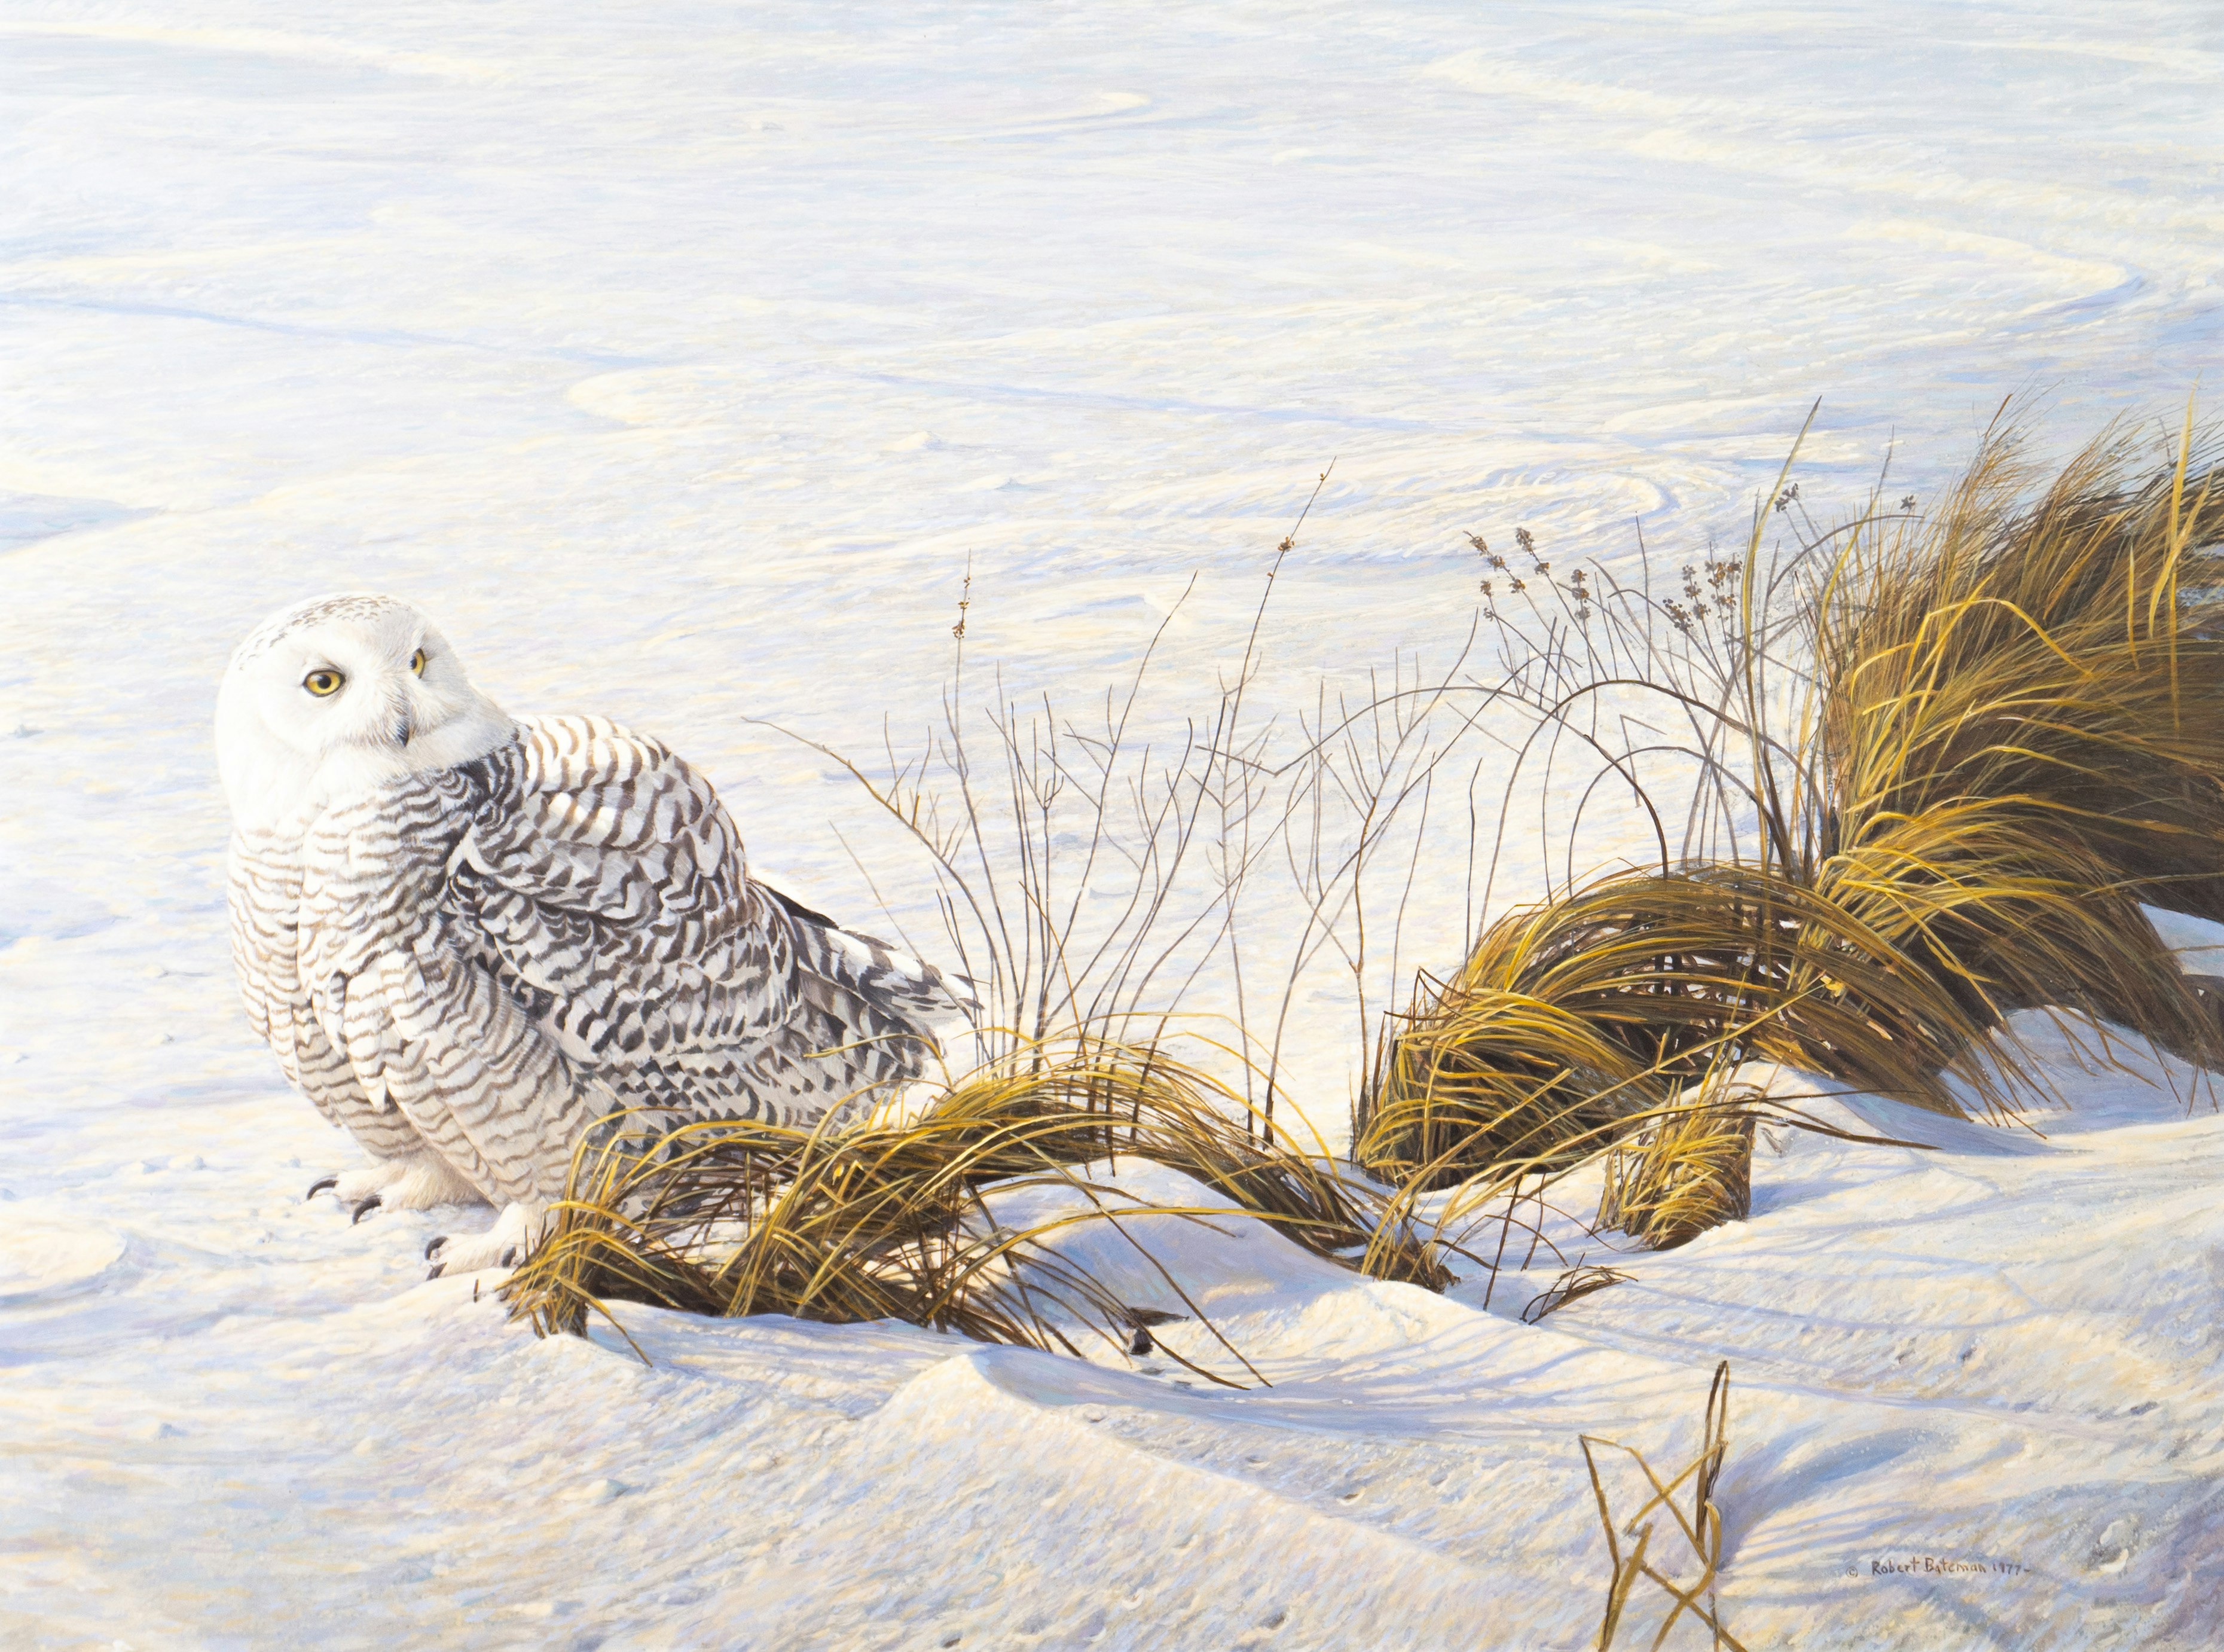 Afternoon Glow by Robert Bateman, 1977 Acrylic on Panel - (36x48 in)